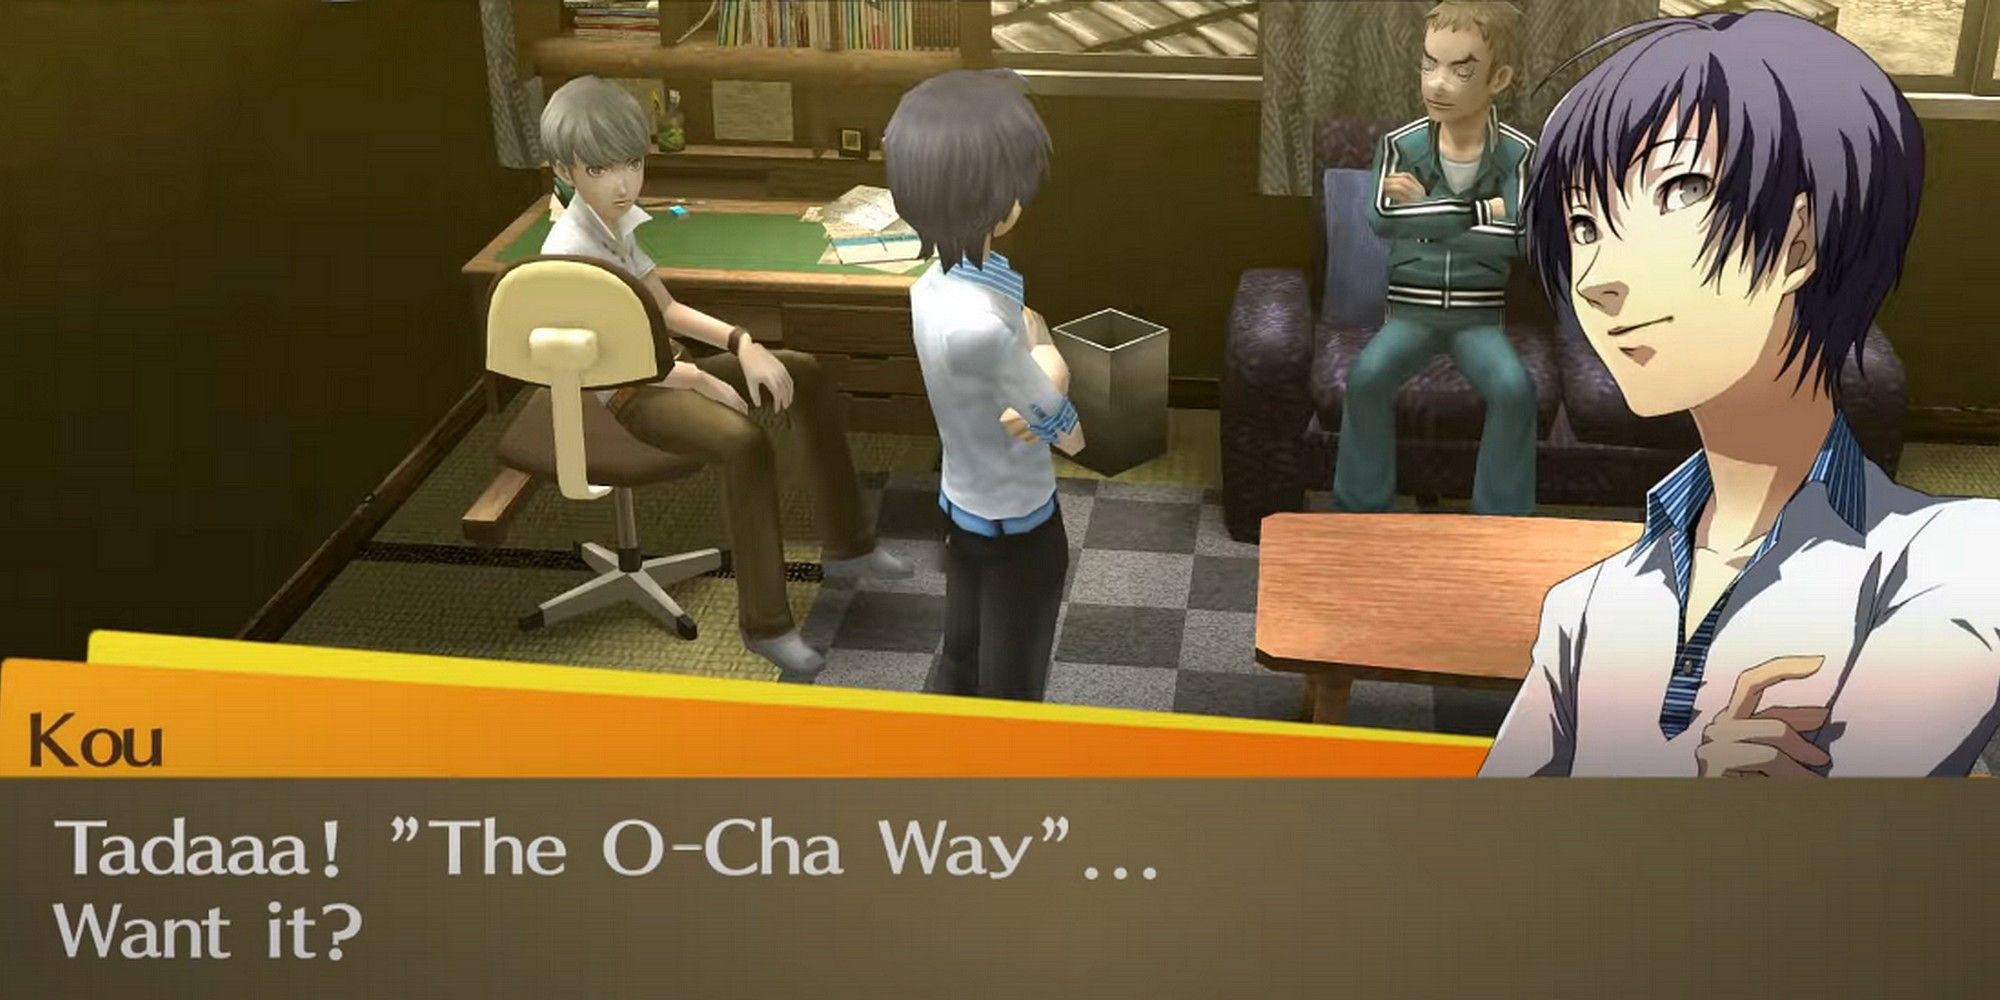 Yu, Daisuke, and Kou in Yu's room discussing The O-Cha Way in Persona 4 Golden